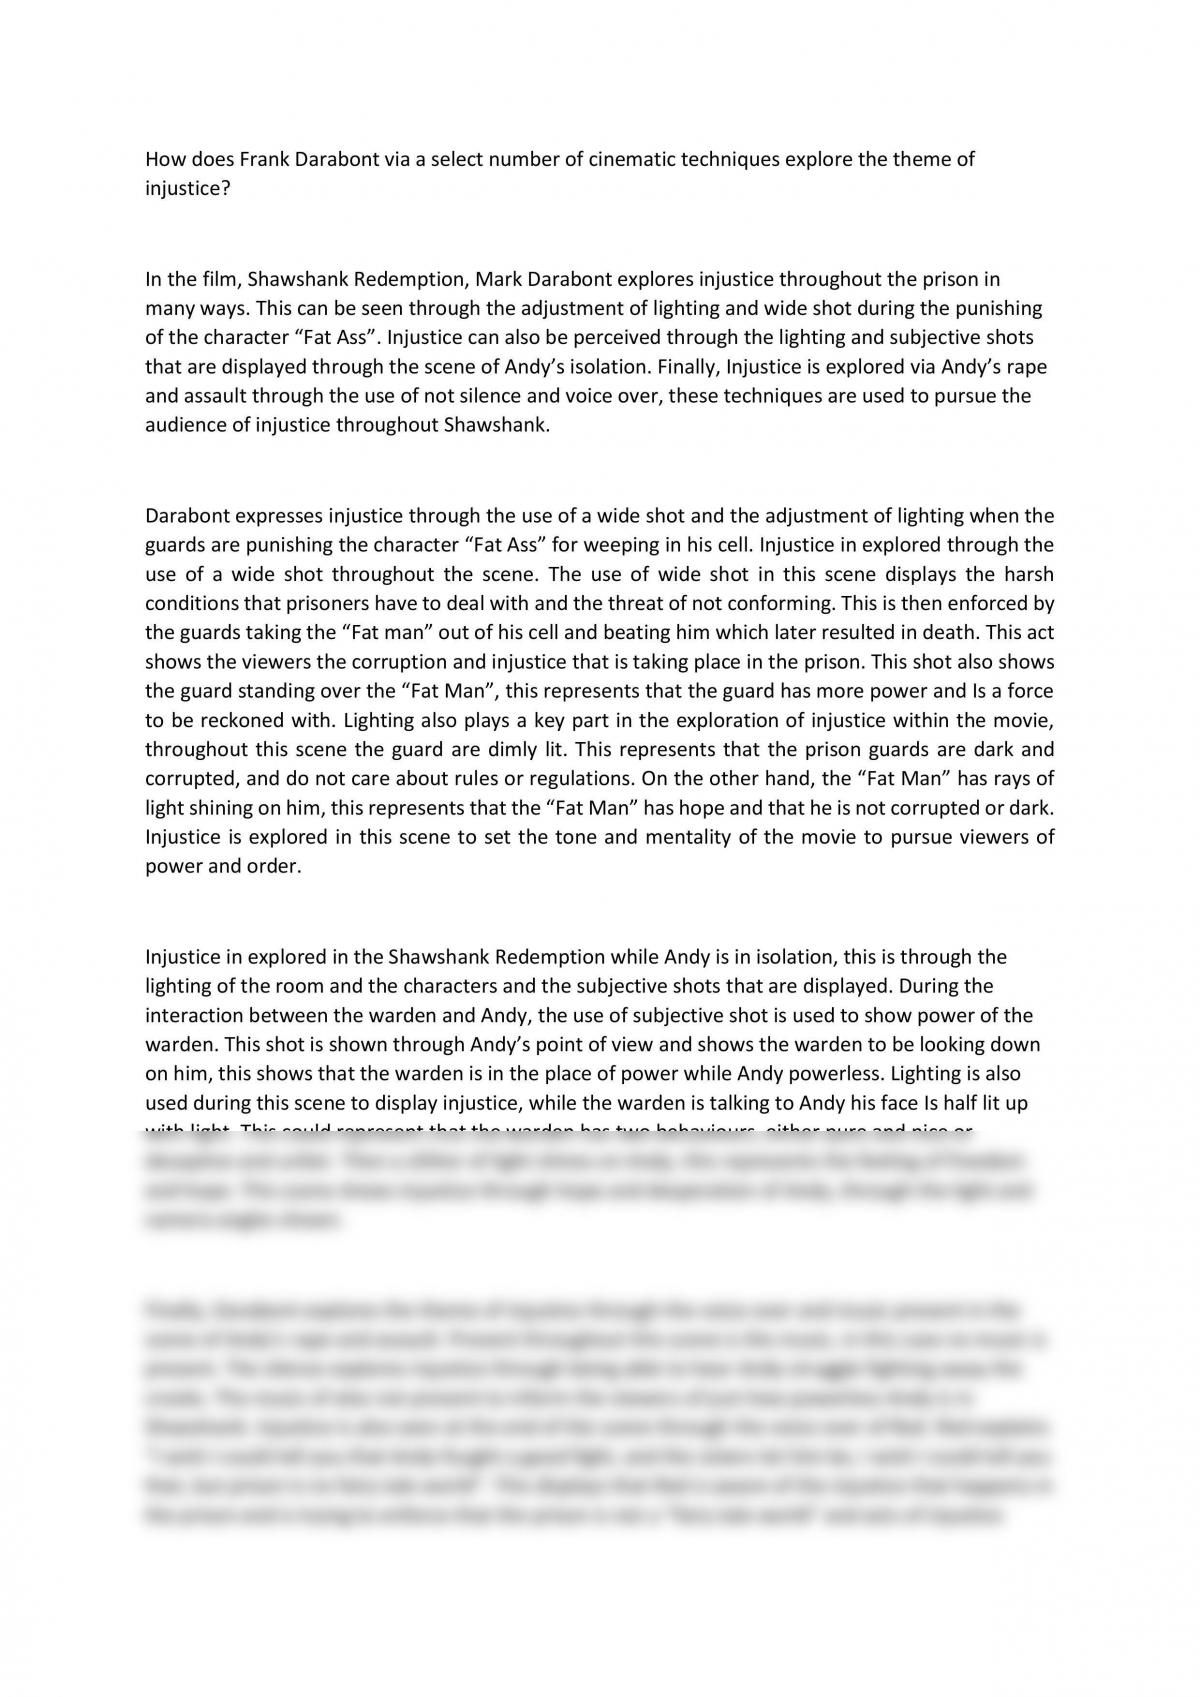 shawshank redemption compare and contrast essay